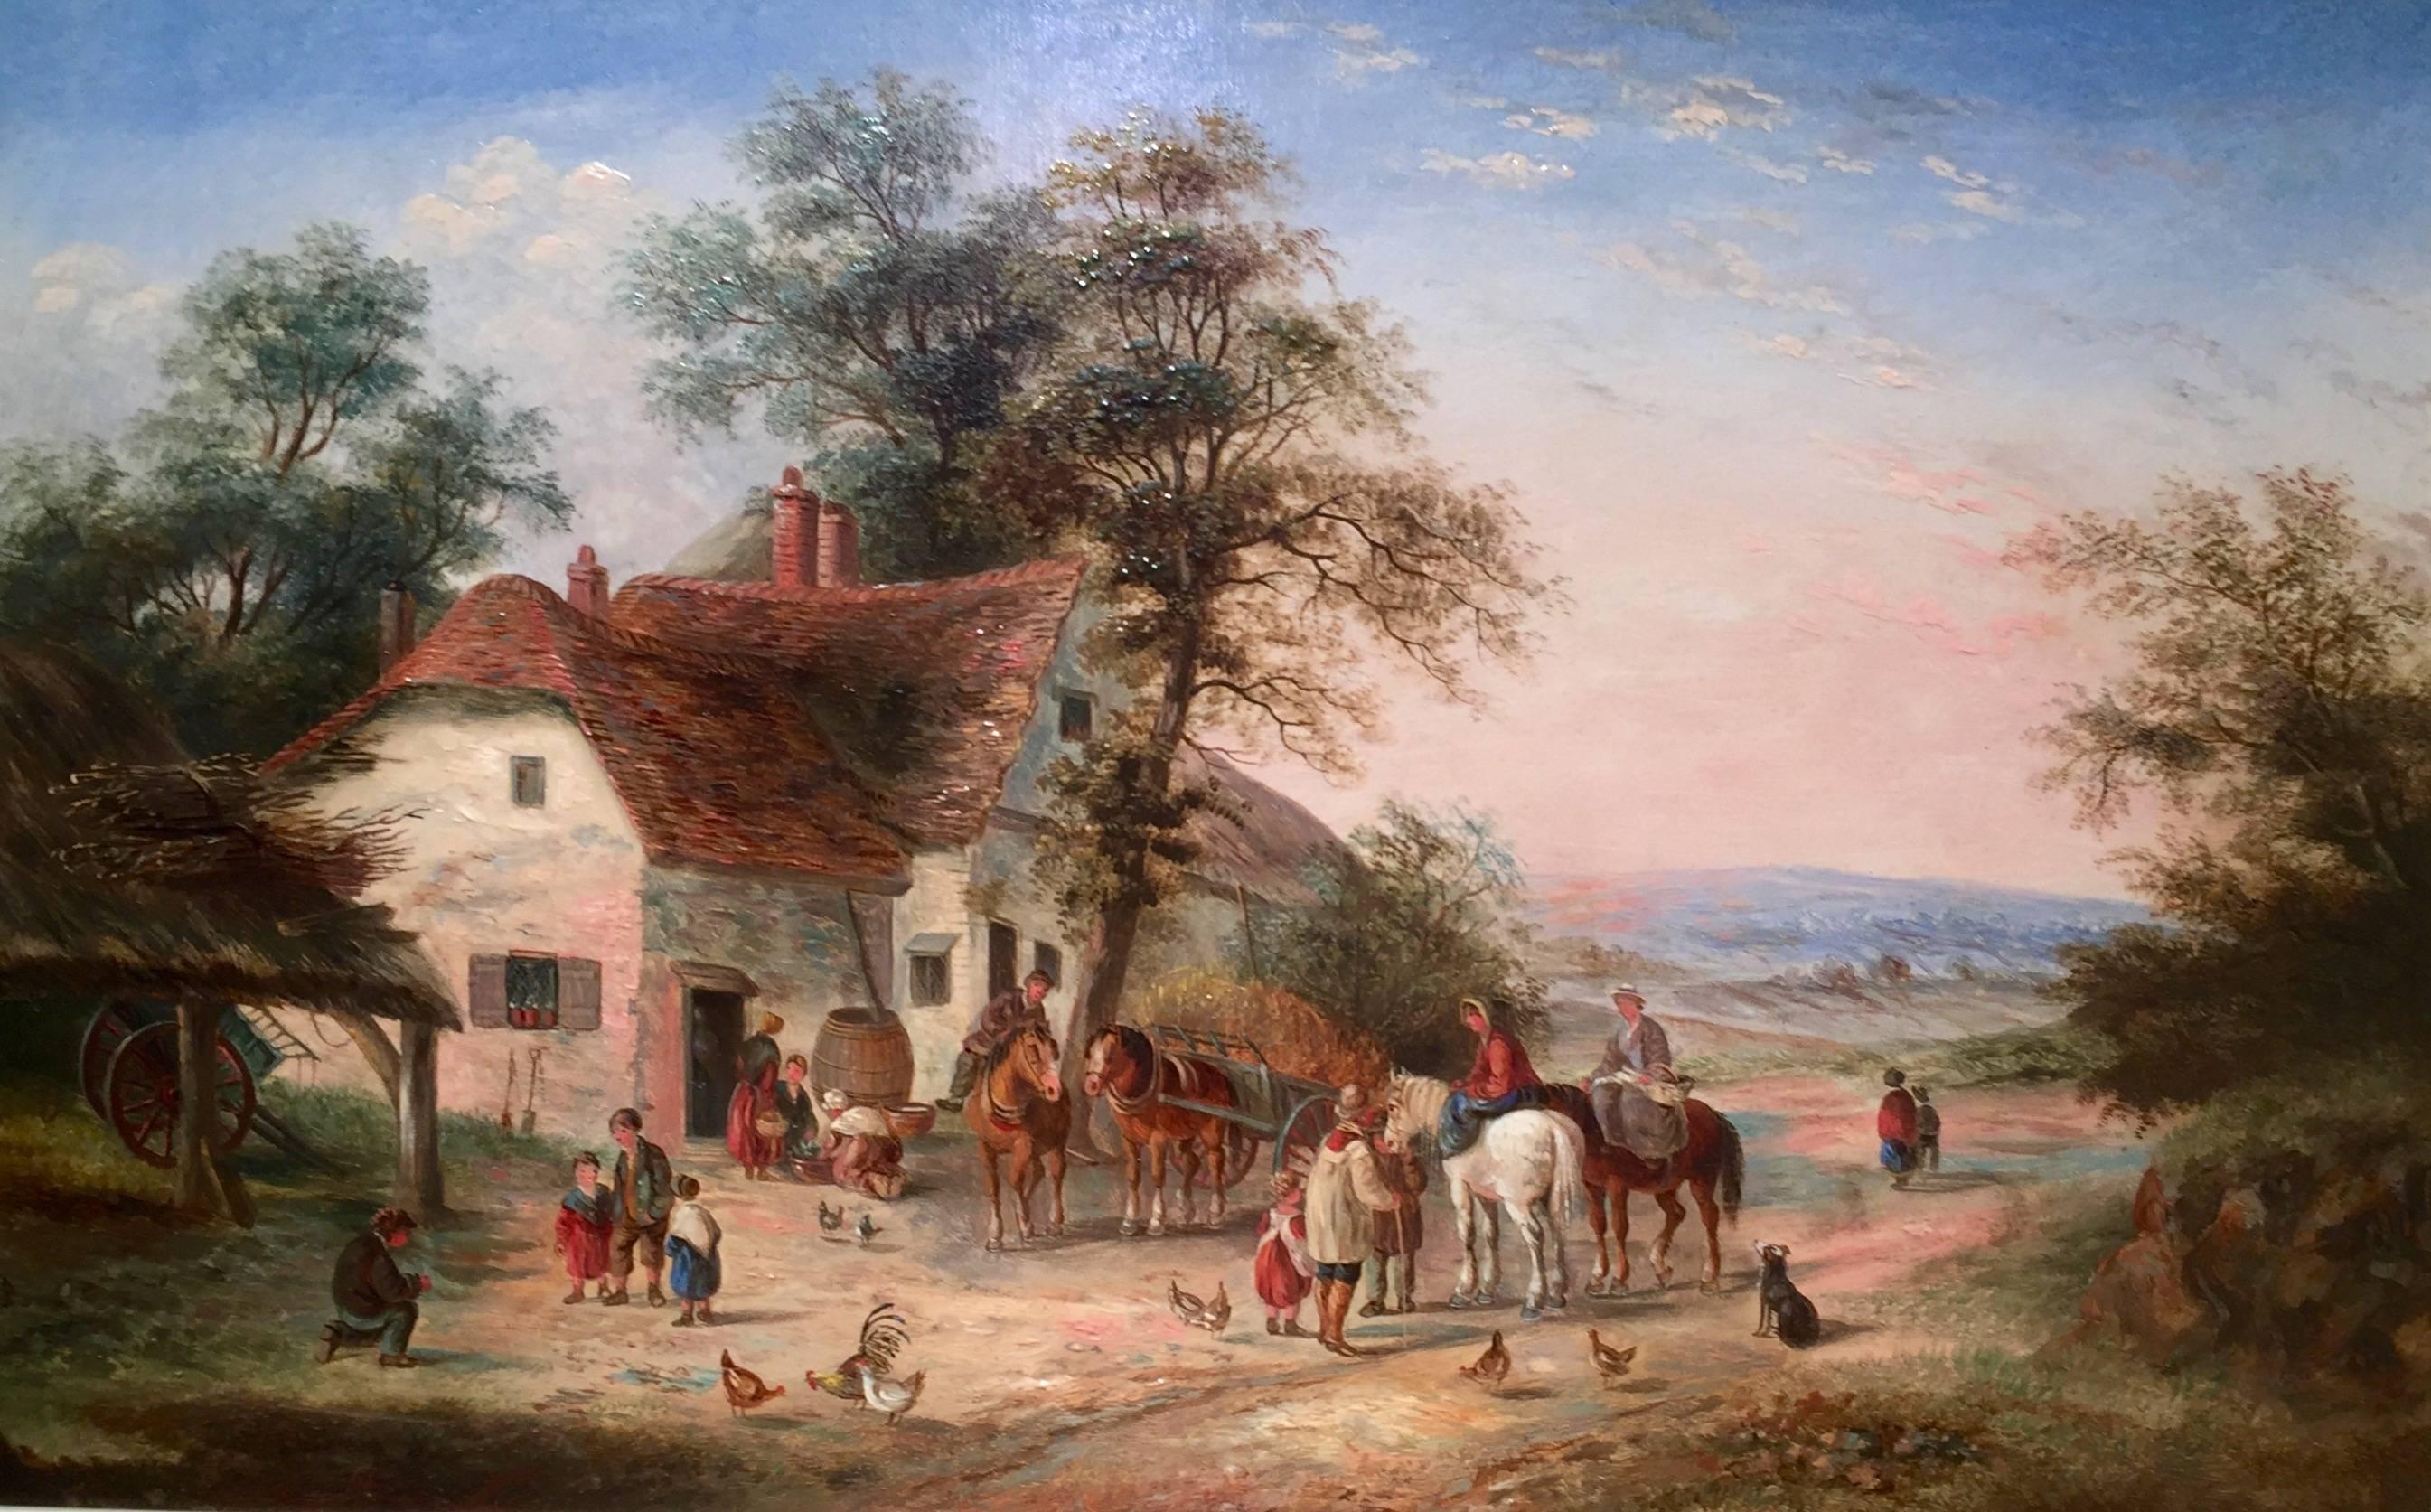 English Village life with horses, chickens, dogs and people - Painting by Georgina Lara